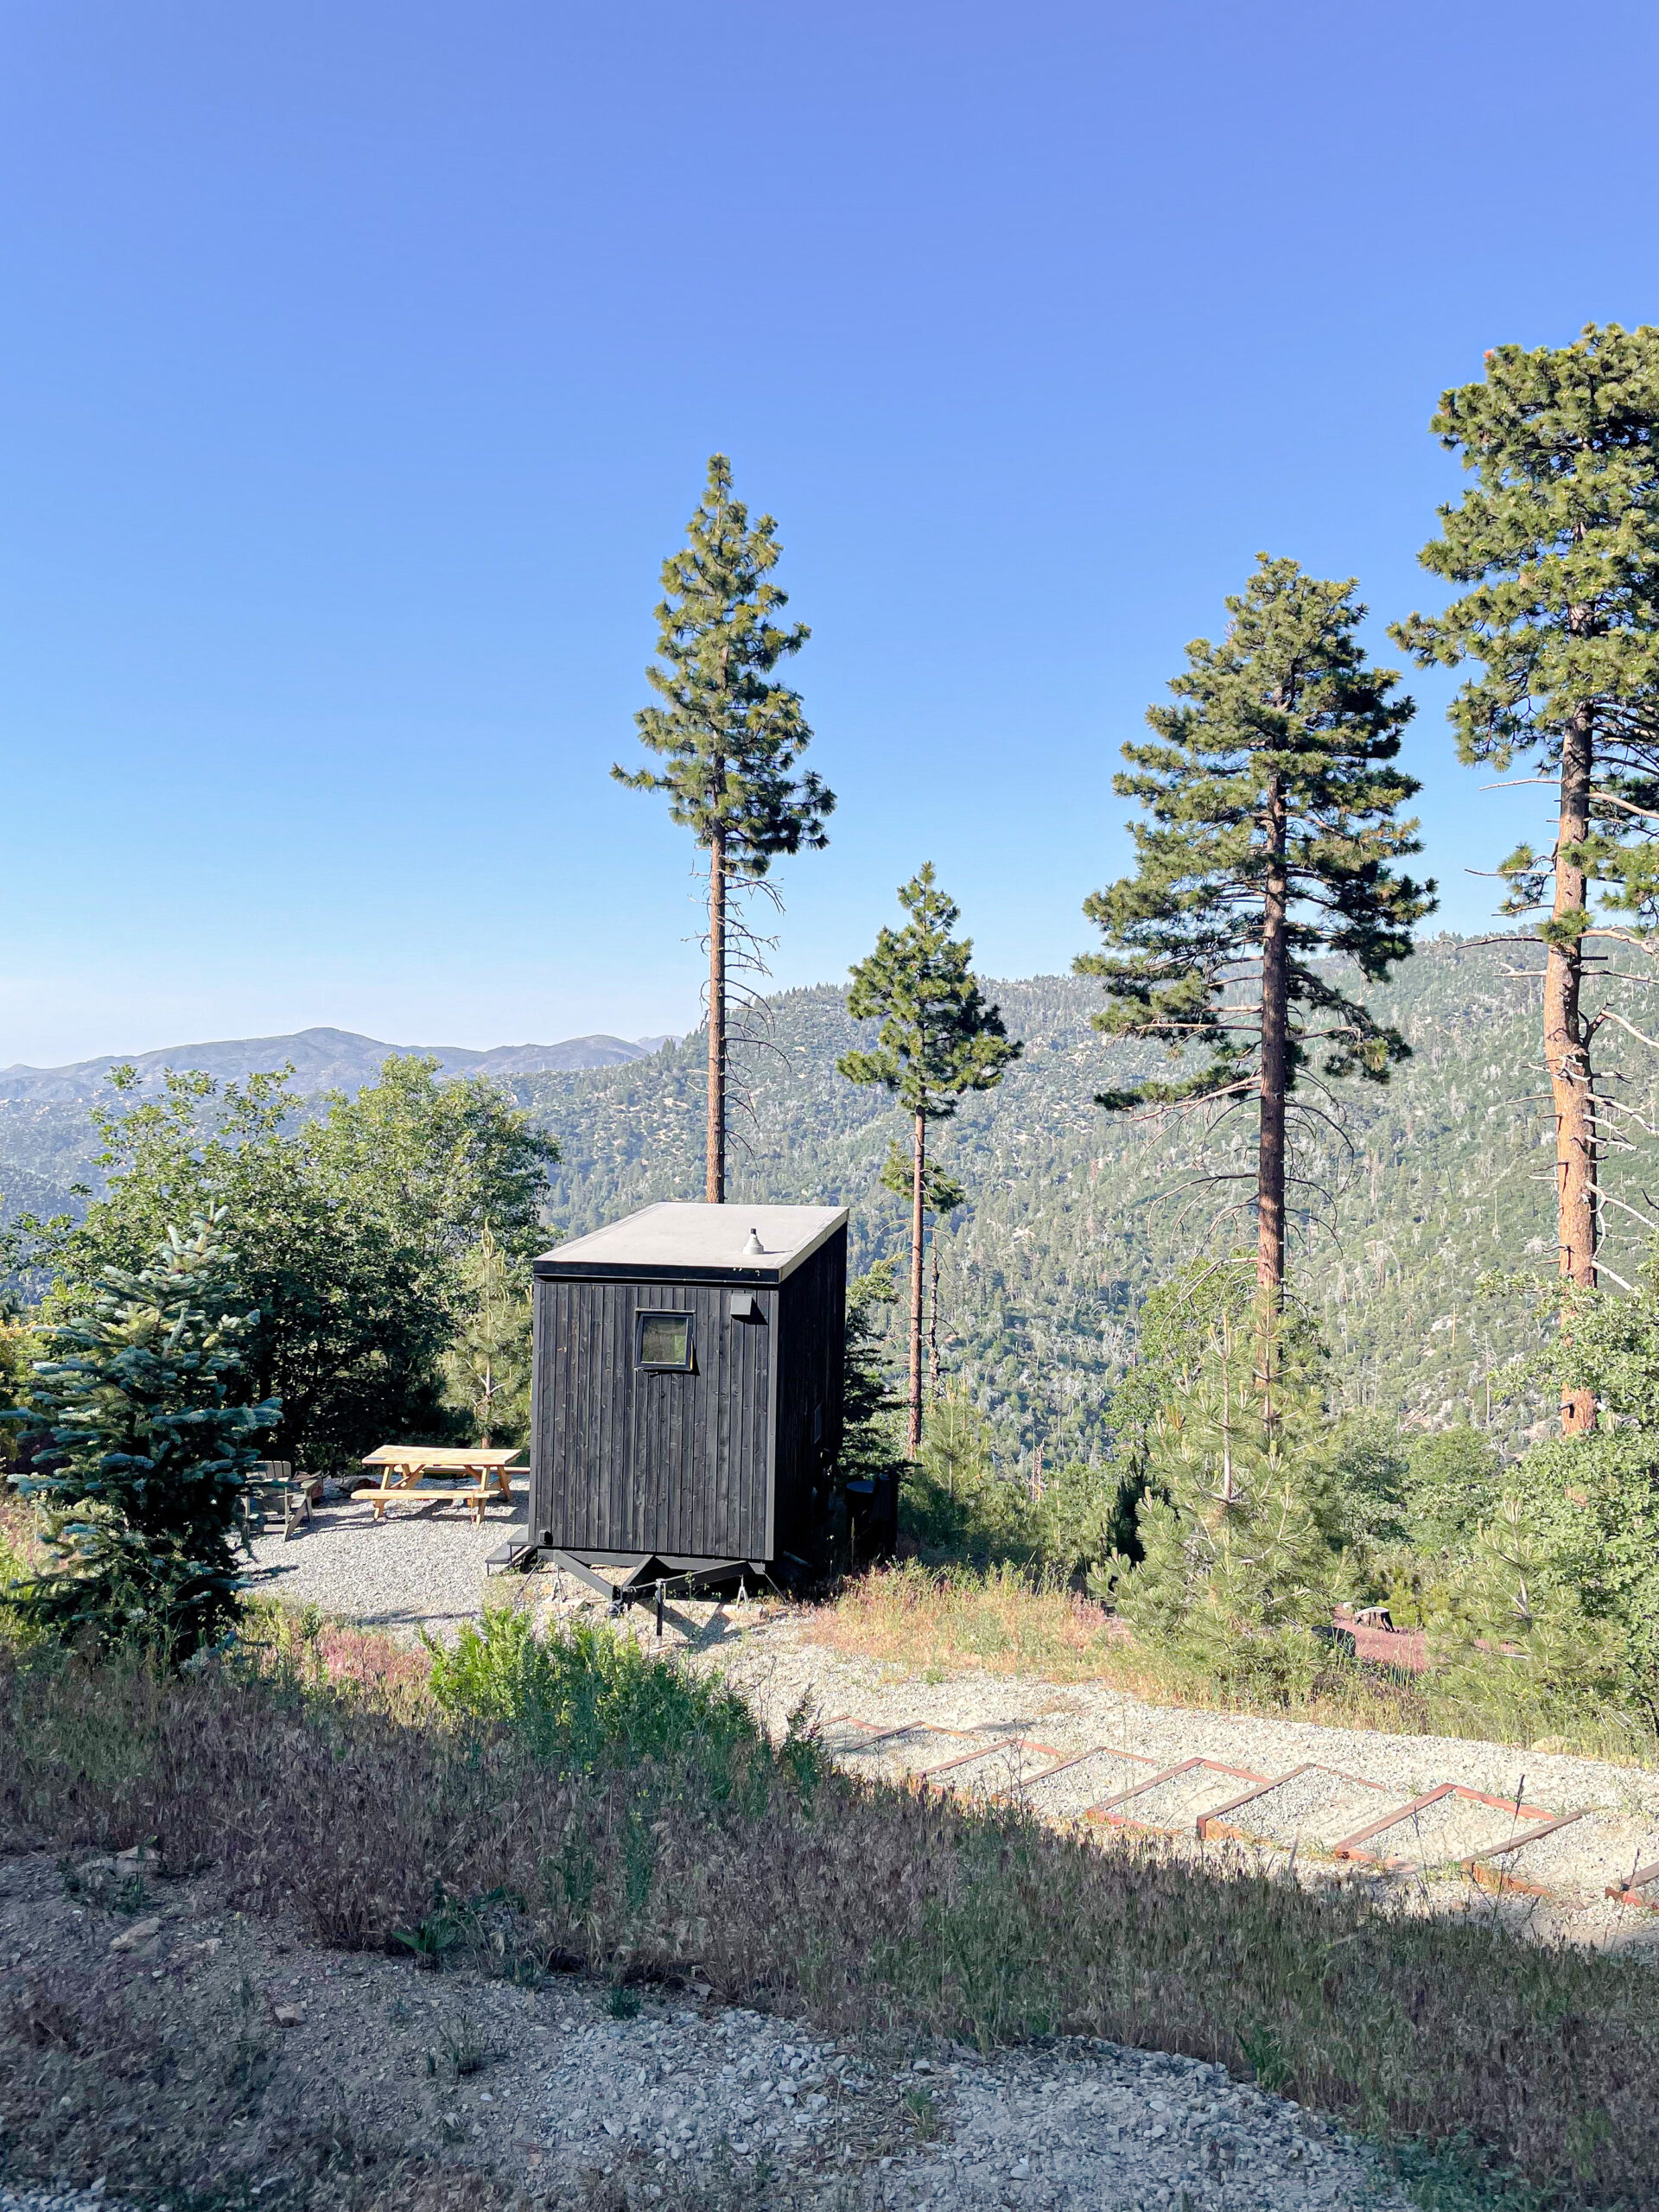 Getaway House - Los Angeles Near Big Bear California tiny home in nature cabin in the woods